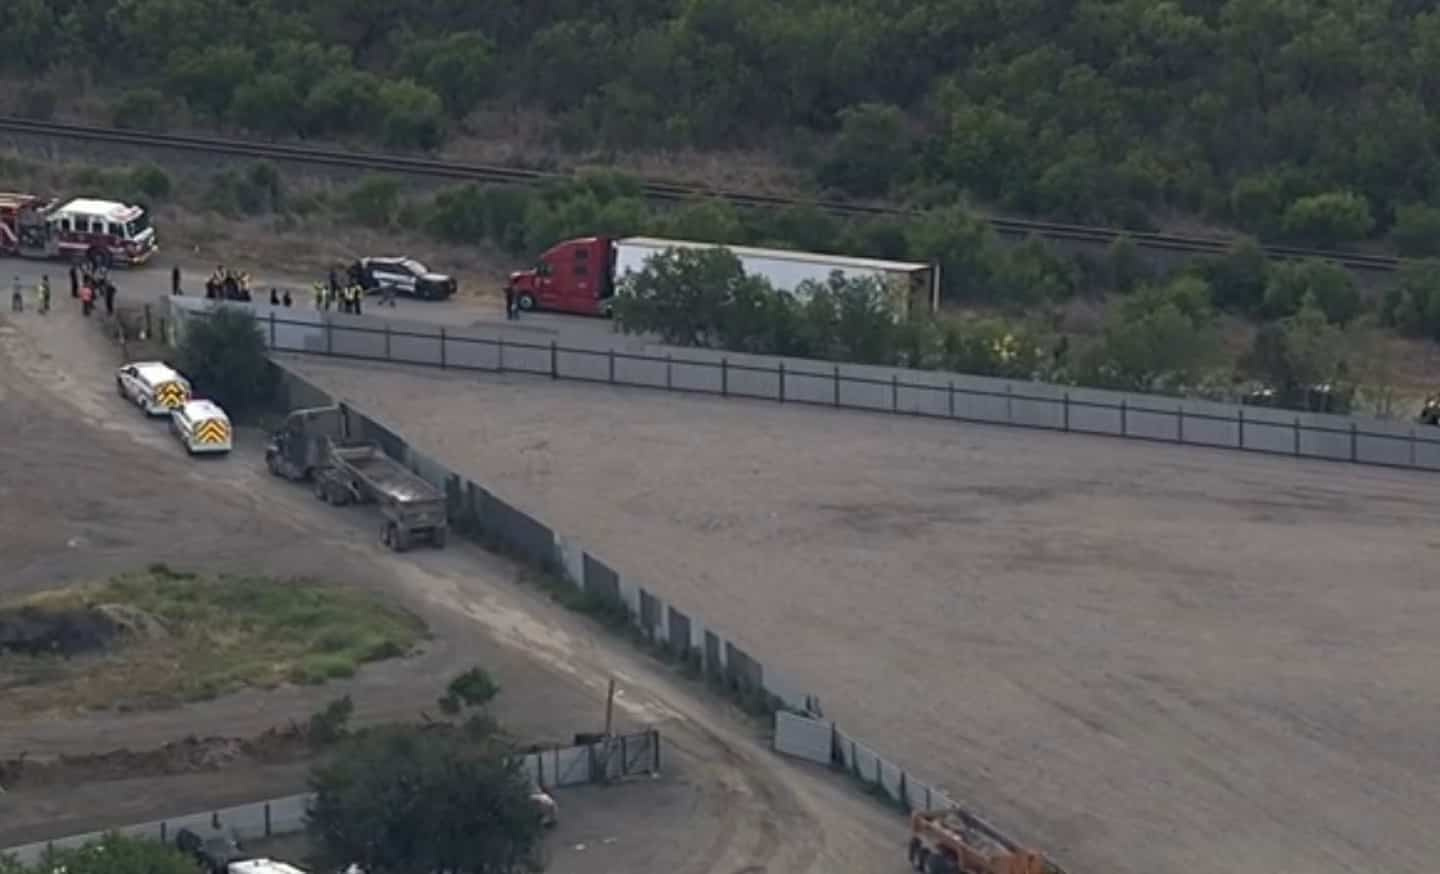 At least 20 migrants found dead in heavy truck in Texas